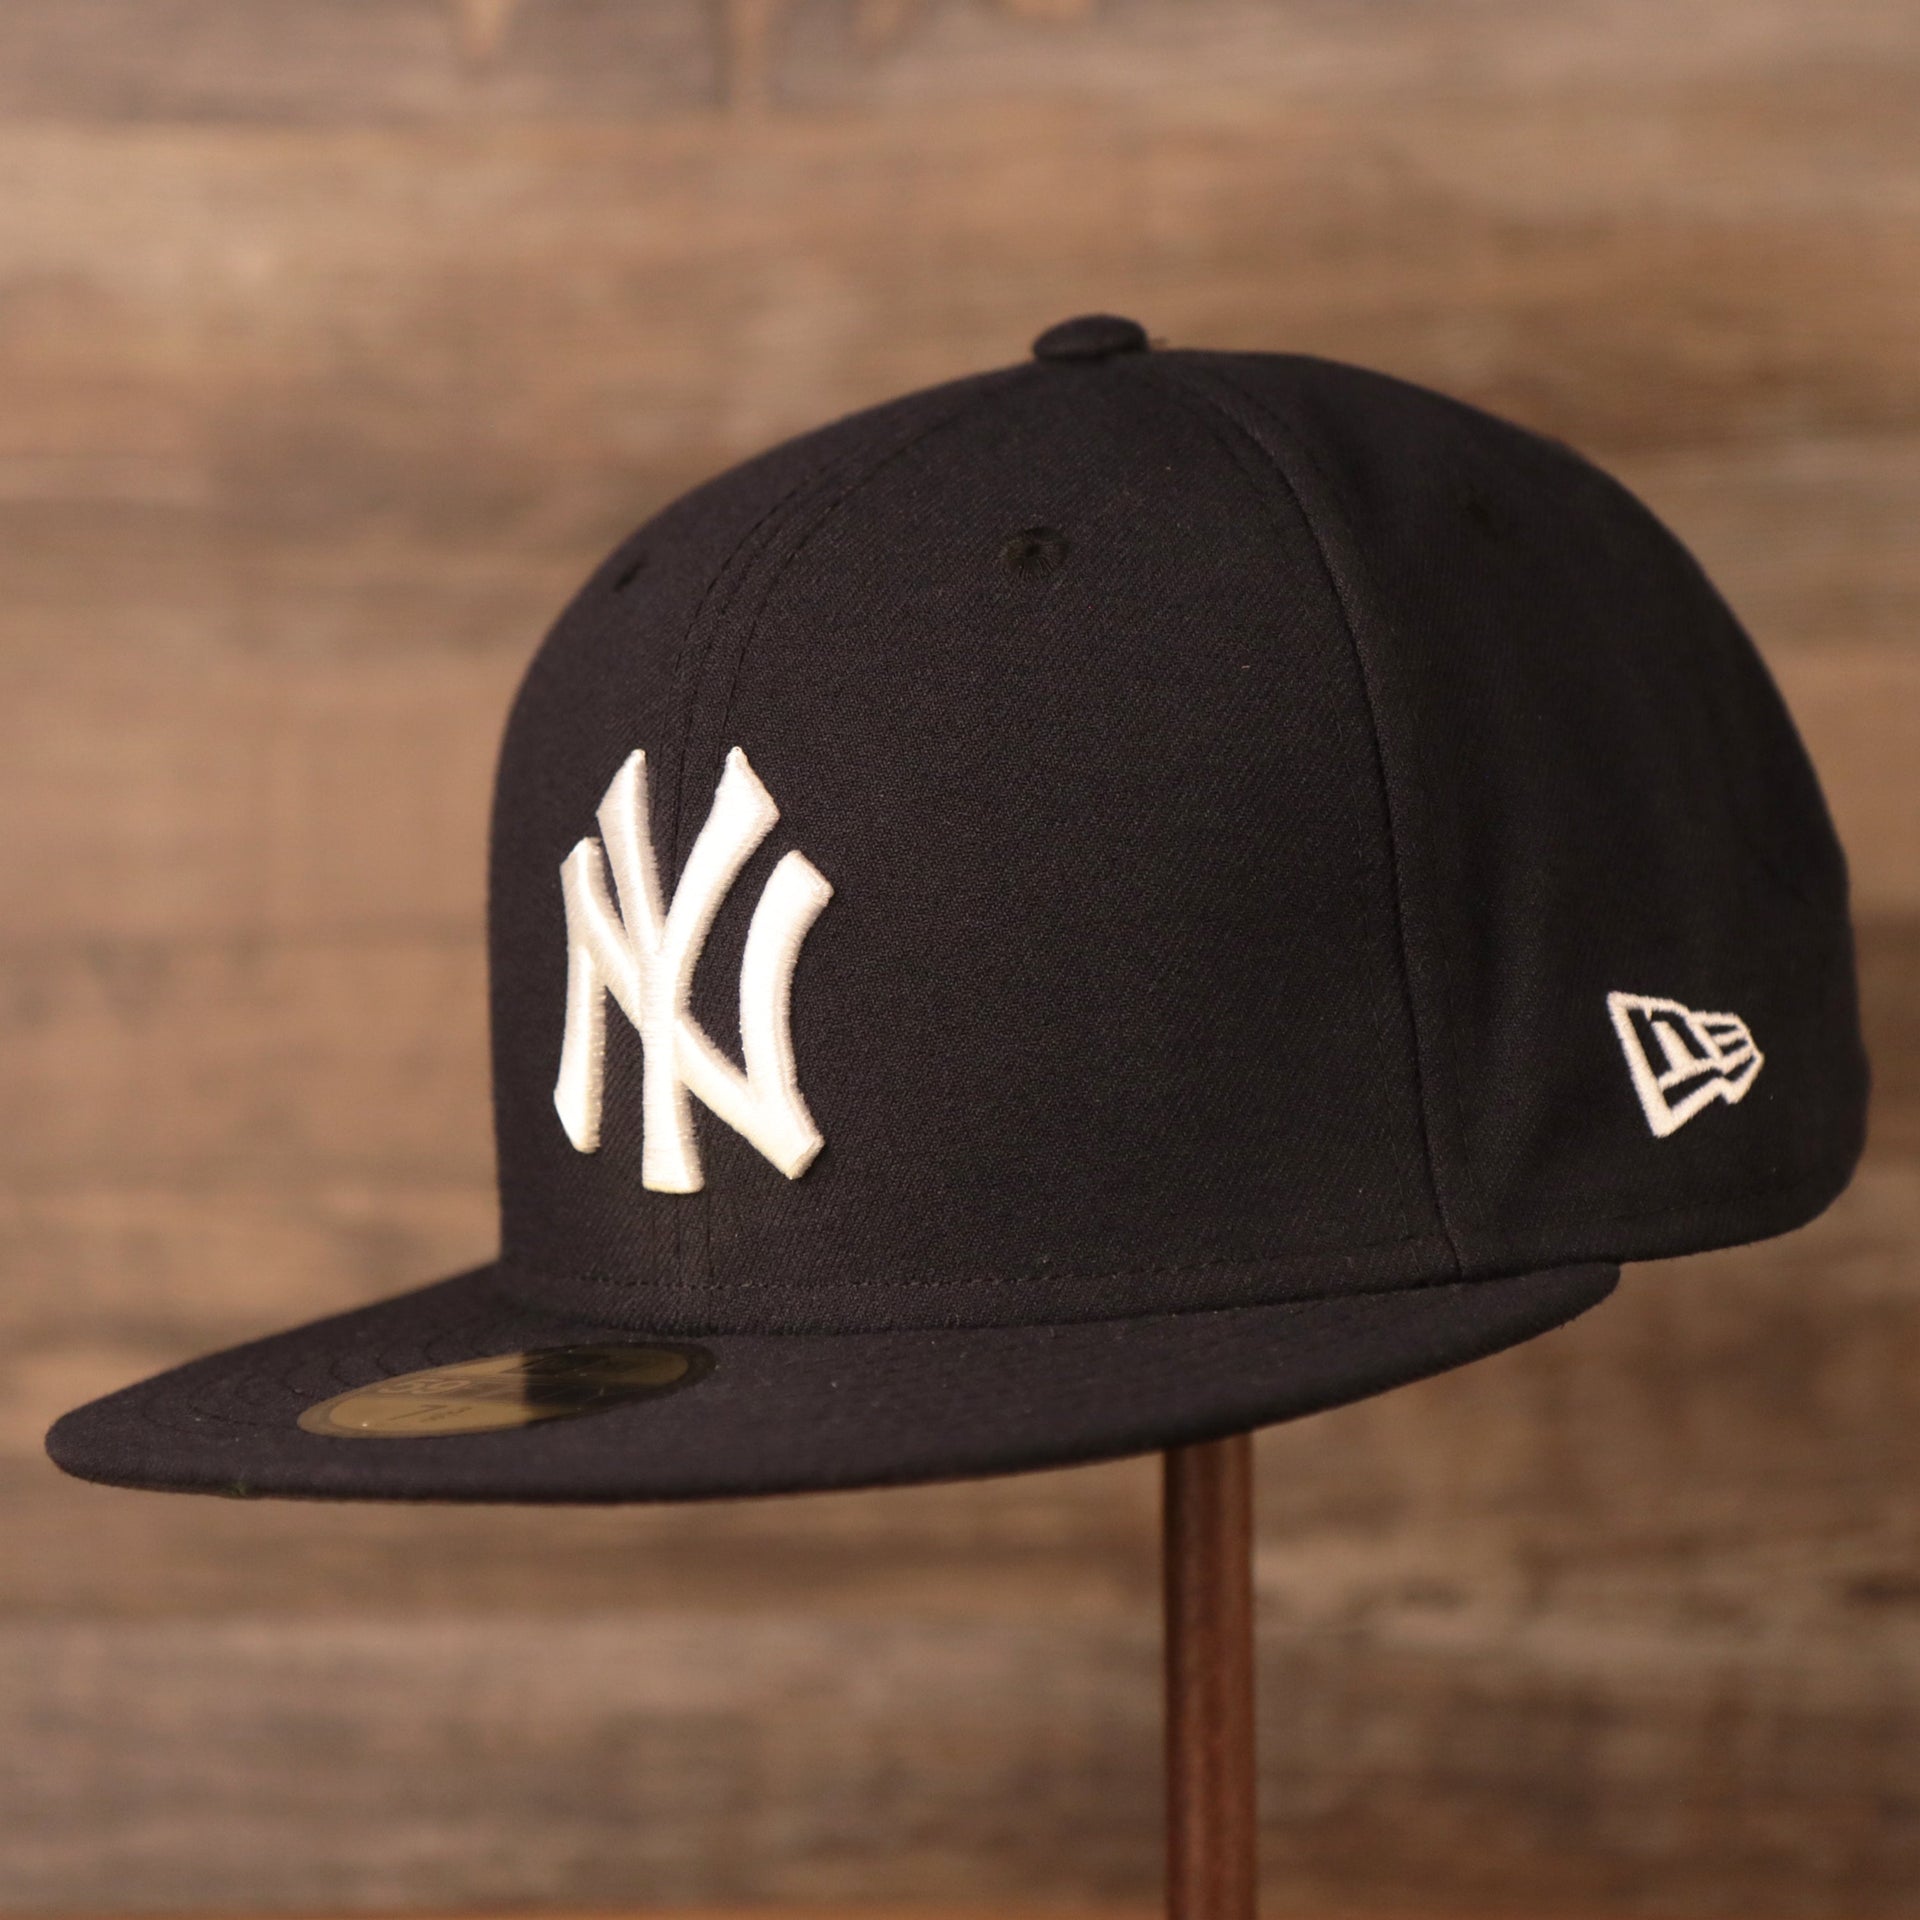 Quarter view of the 59Fifty Fitted, showing the New Era Logo and the Yankees Logo